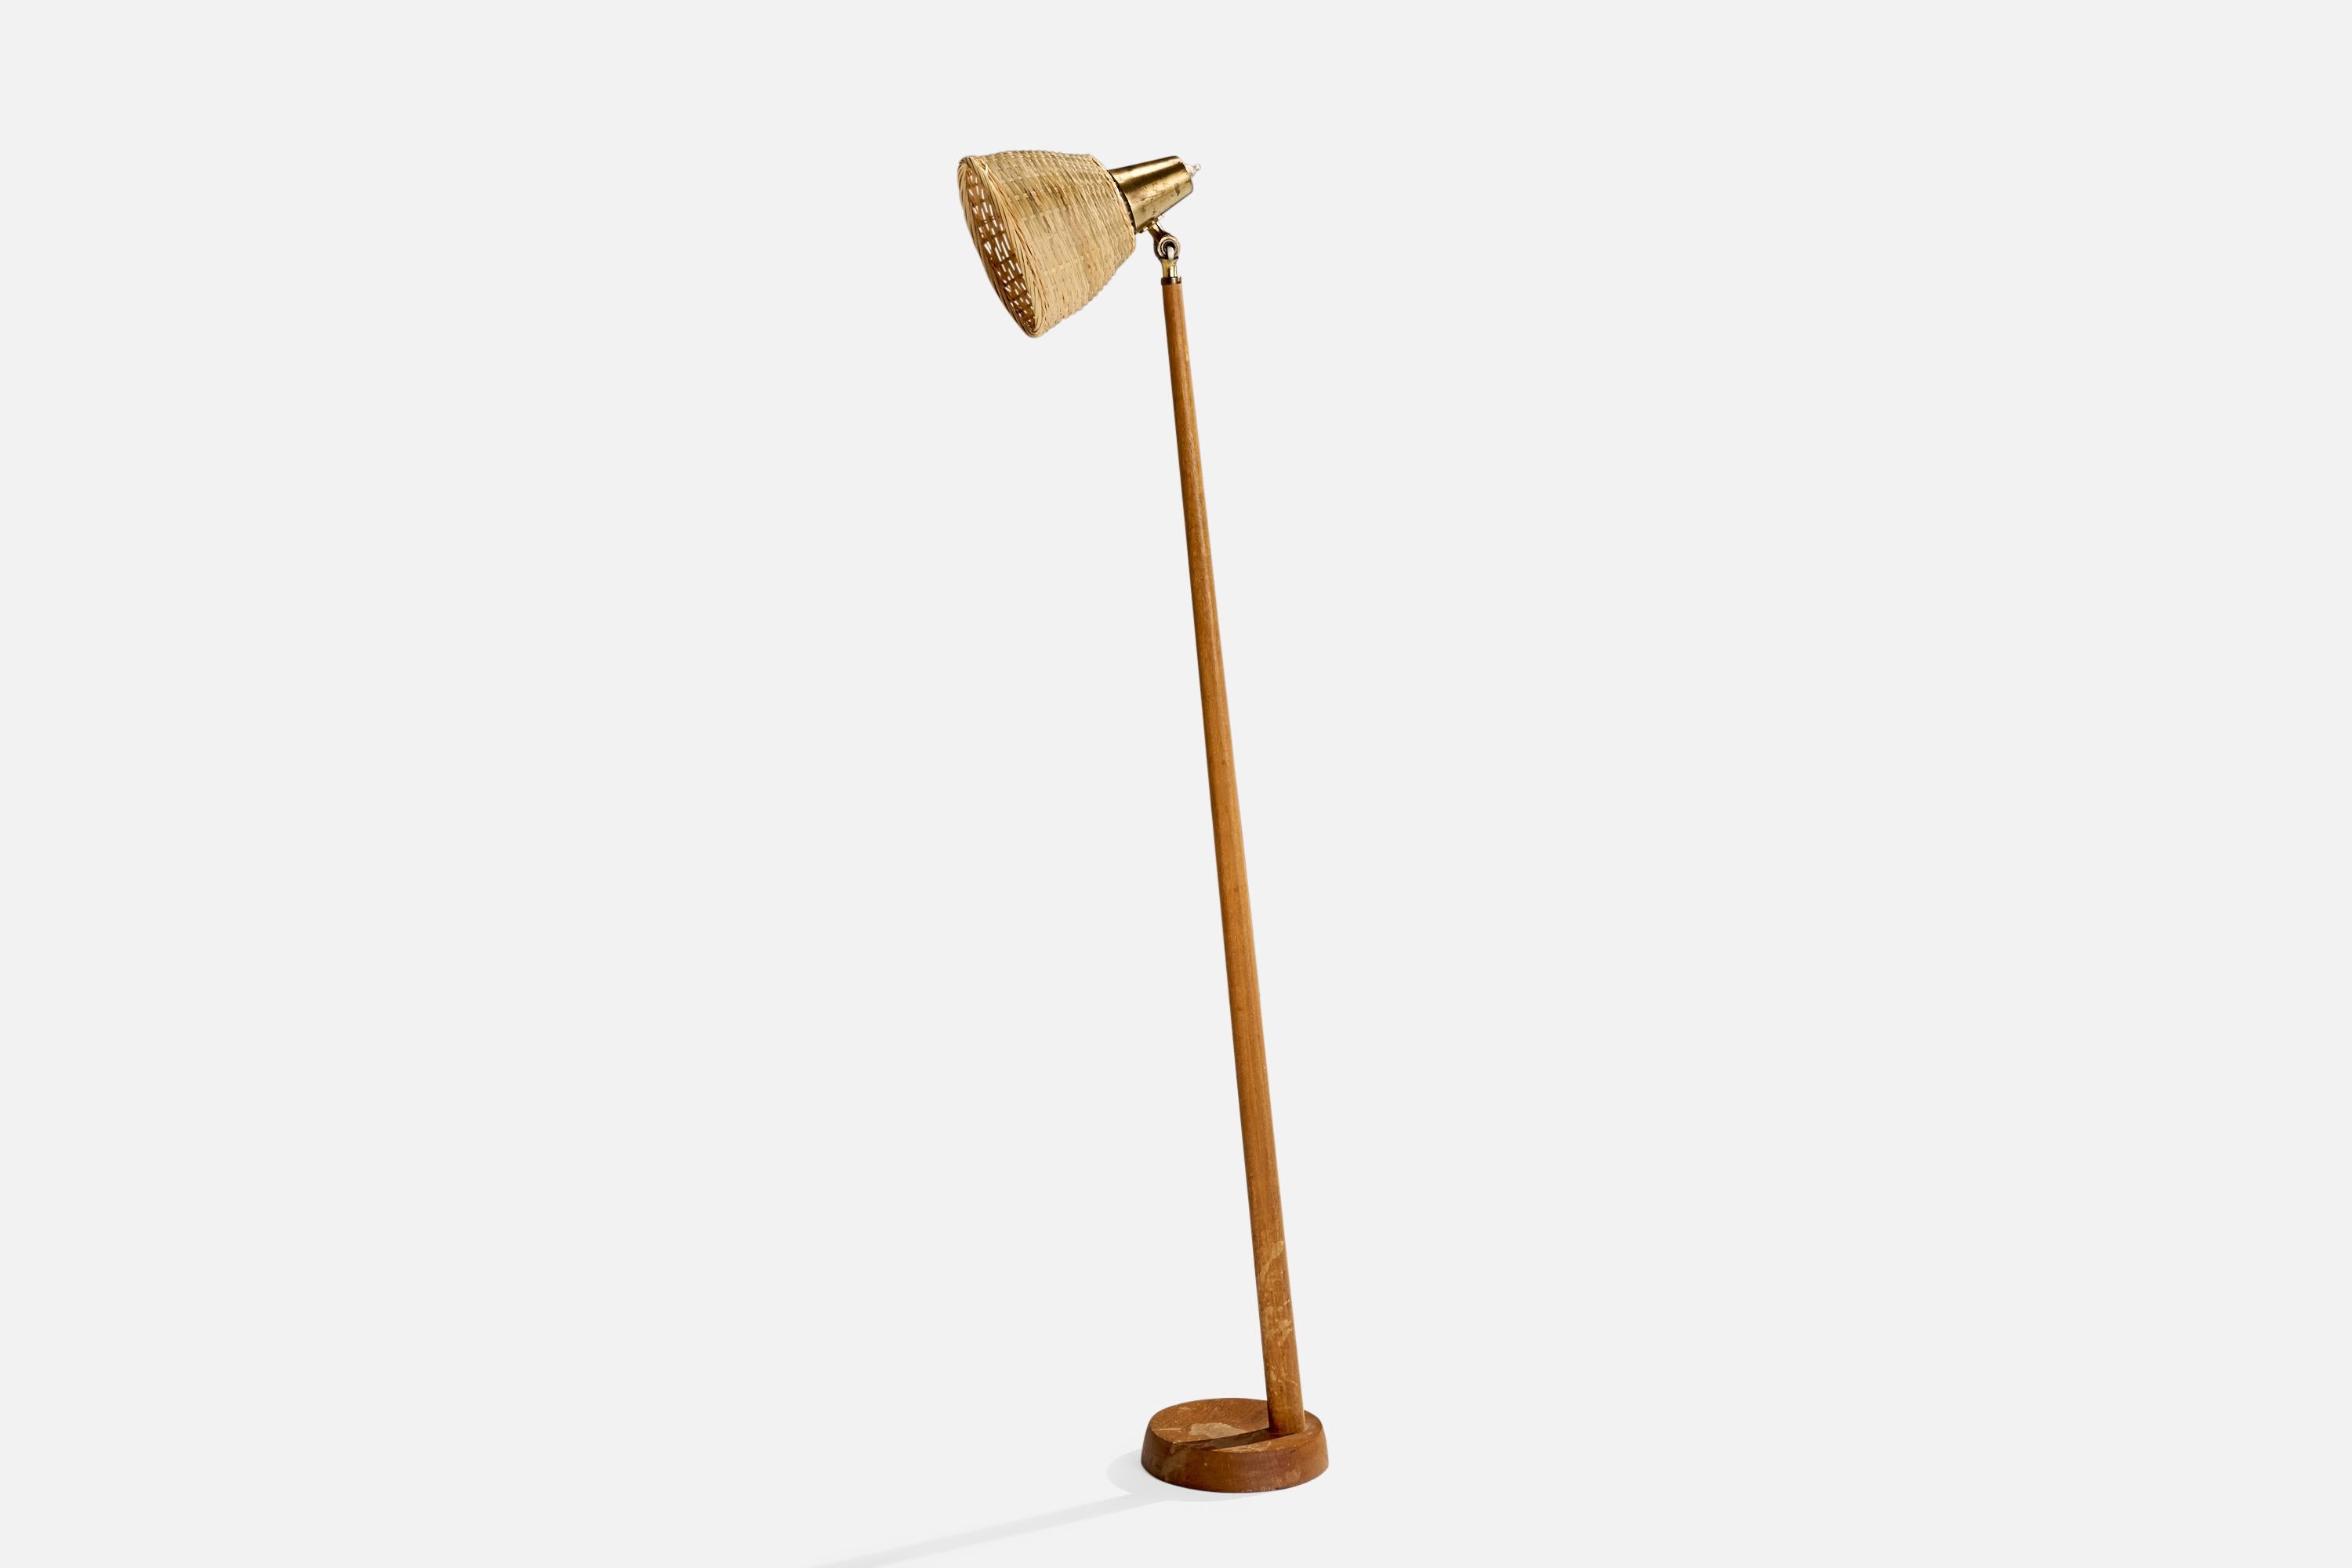 An adjustable brass, oak and rattan floor lamp designed and produced by Falkenbergs Belysning, Sweden, 1960s.

Overall Dimensions (inches): 49.22”  H x 6.7” W x 14.57”  D
Stated dimensions include shade.
Bulb Specifications: E-26 Bulb
Number of